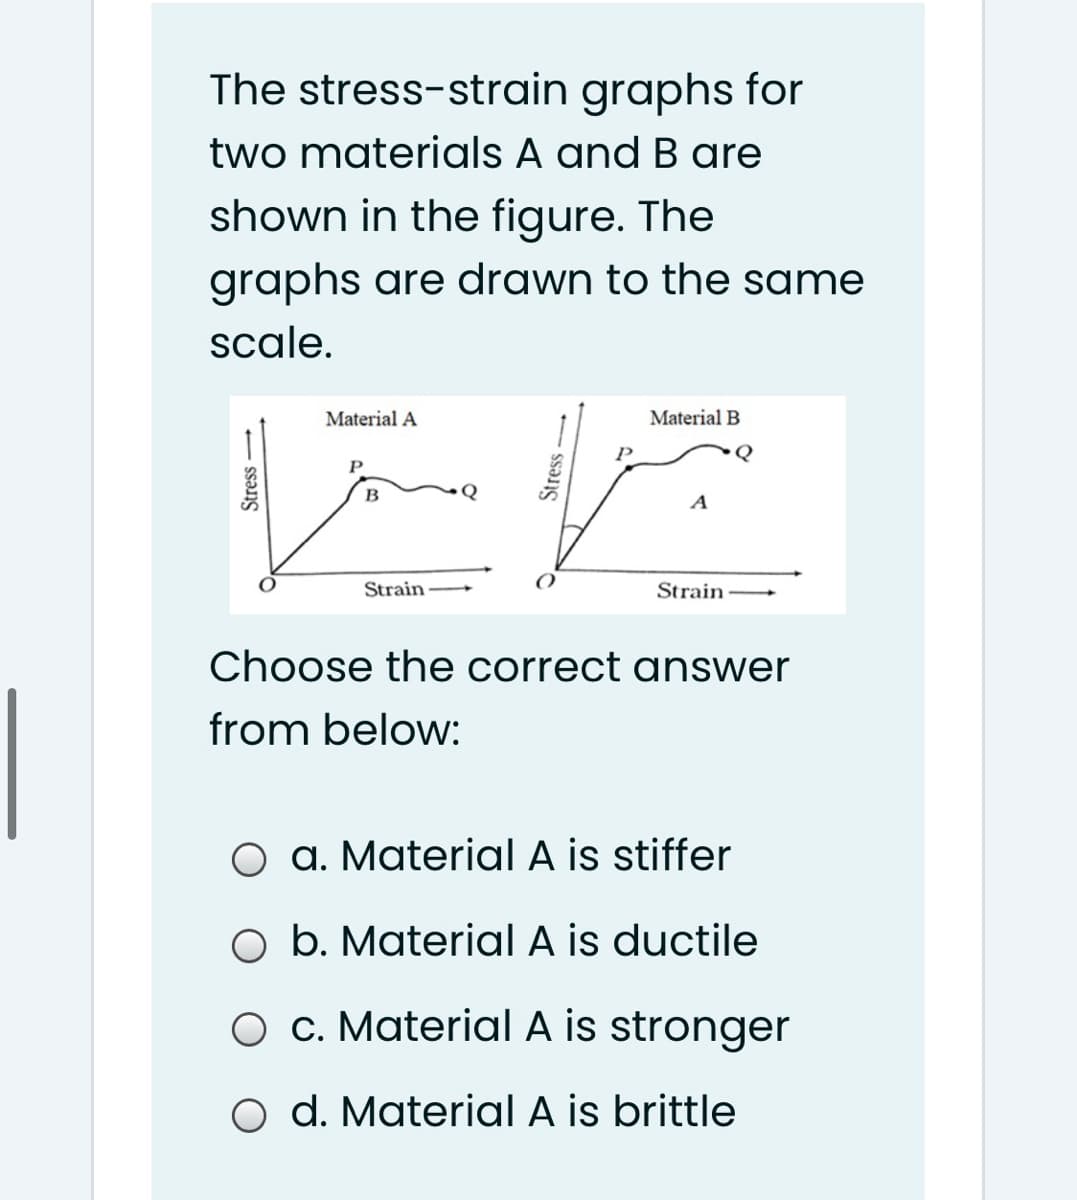 The stress-strain graphs for
two materials A and B are
shown in the figure. The
graphs are drawn to the same
scale.
Material A
Material B
P
B
A
Strain
Strain
Choose the correct answer
from below:
O a. Material A is stiffer
O b. Material A is ductile
O C. Material A is stronger
O d. Material A is brittle
